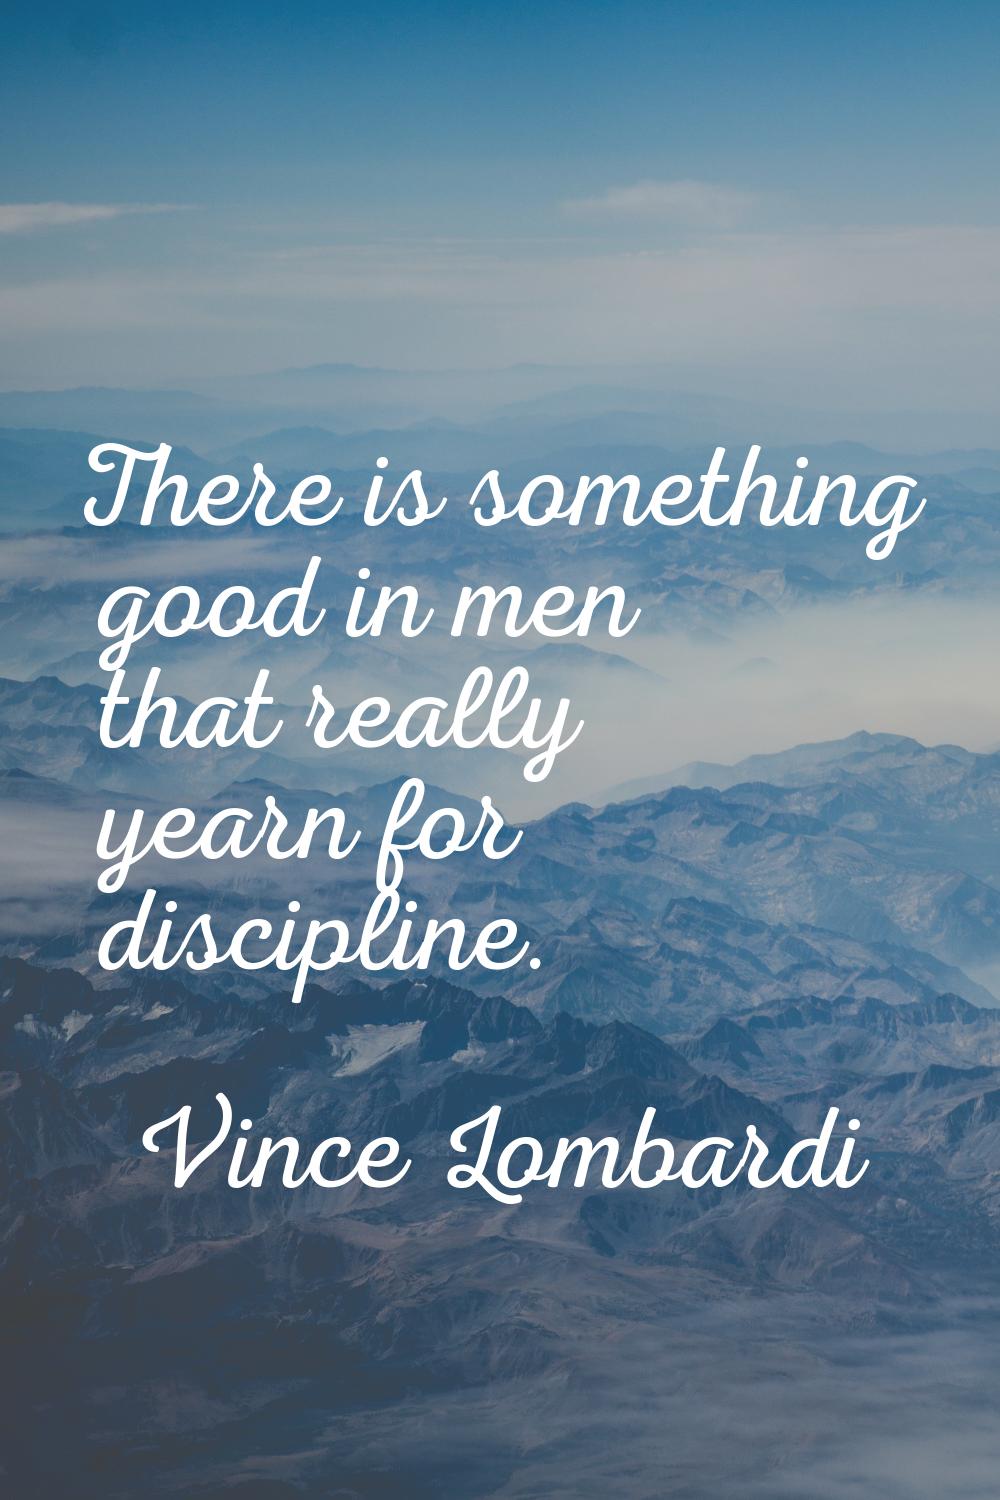 There is something good in men that really yearn for discipline.